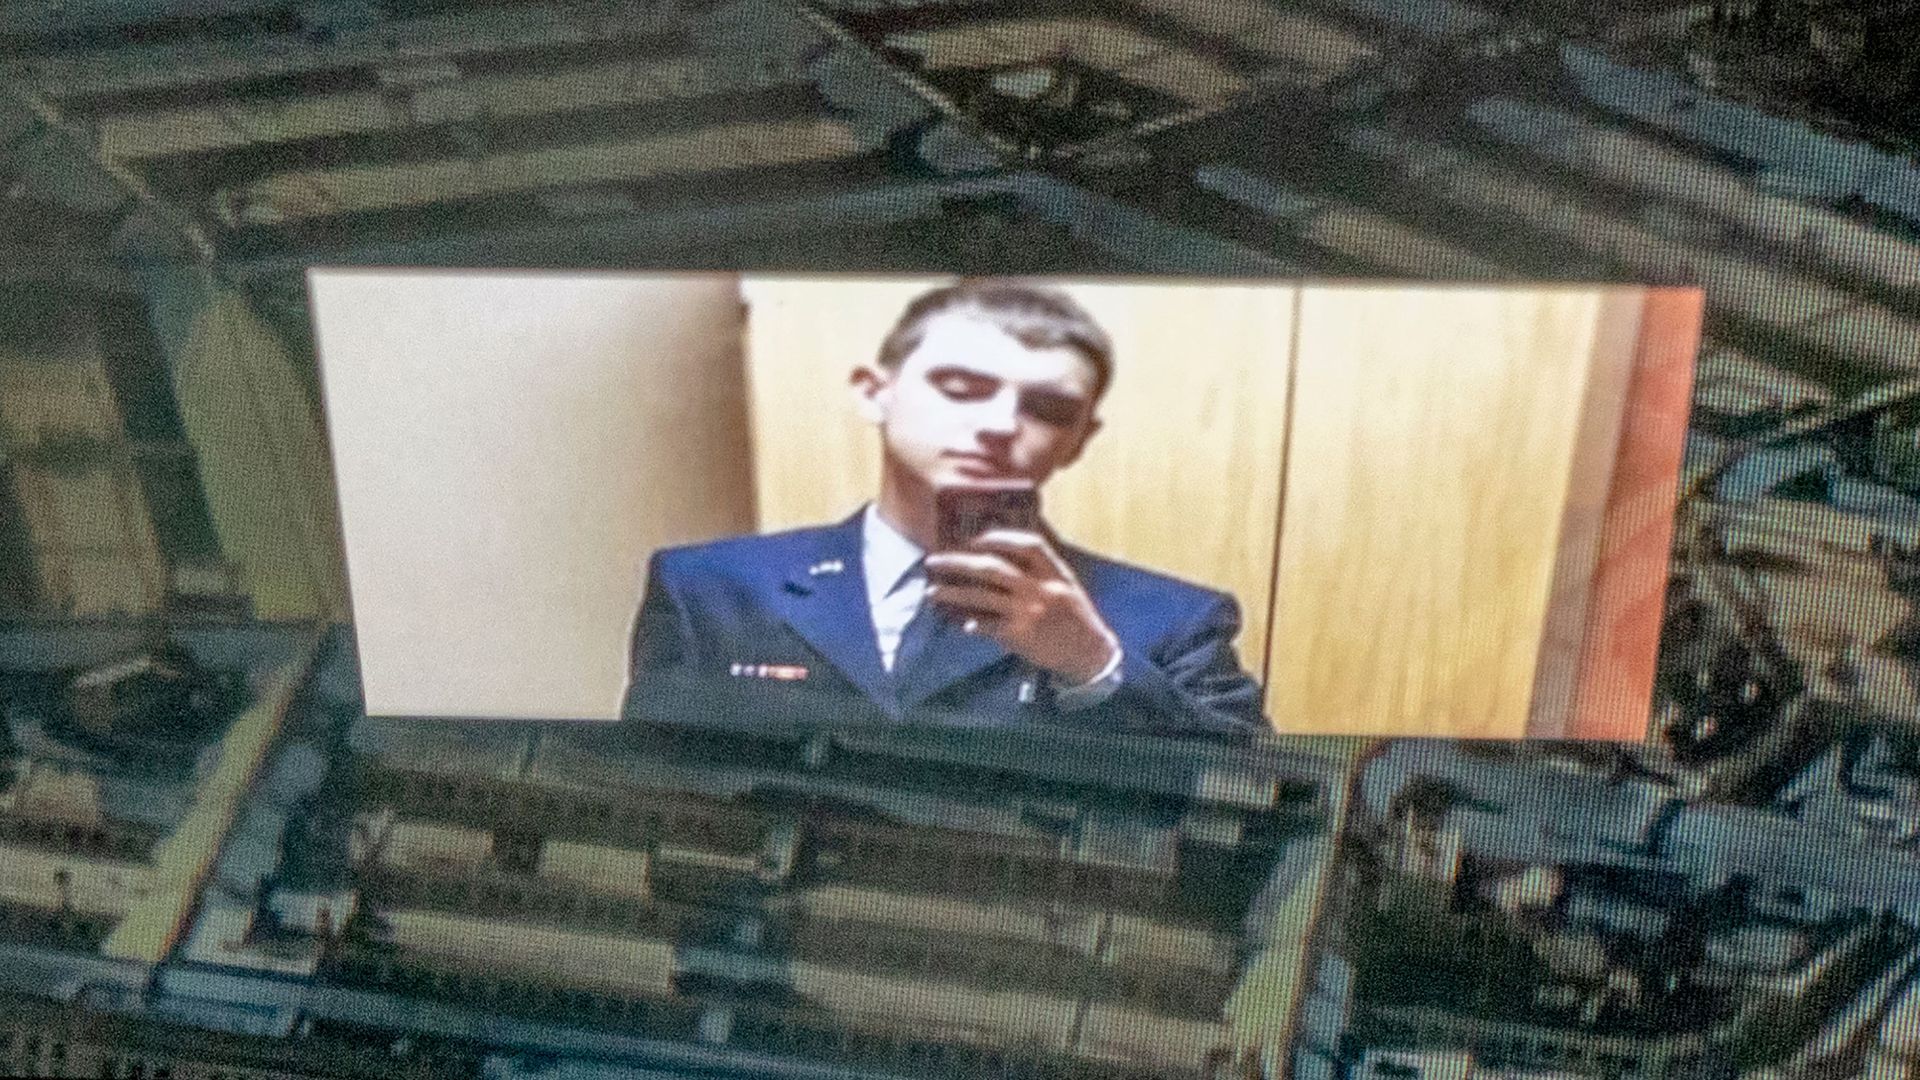 Image of Jack Teixeira reflected in an image of the Pentagon